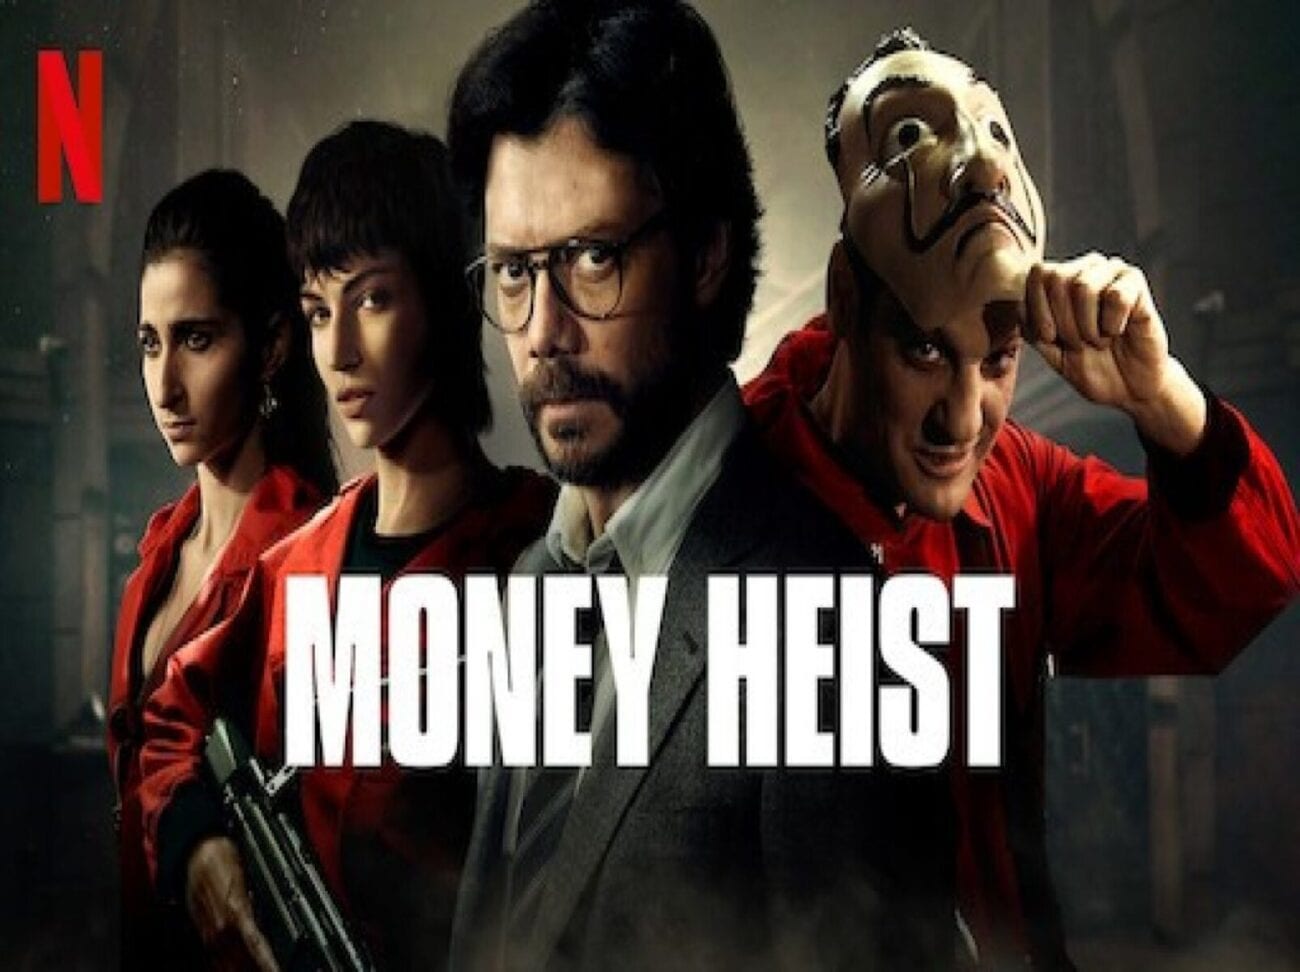 Netflix’s 'La Casa De Papel' – better known as 'Money Heist' – is one of the hottest shows on Netflix. Here are the best quotes.